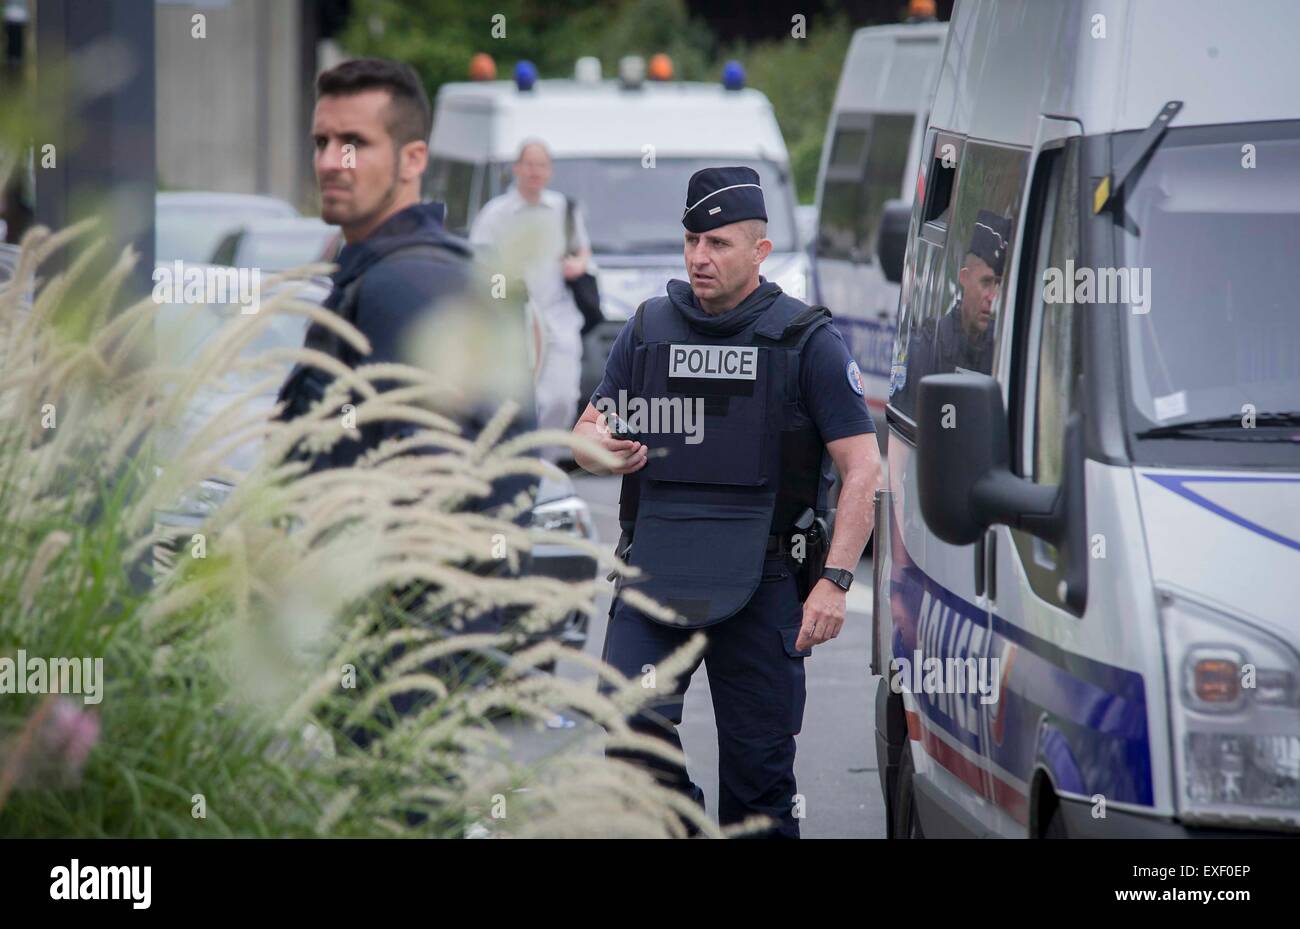 Paris, France. 13th July, 2015. Police officers stand guard outside the site of a hostage helding in Paris, France, July 13, 2015. About 18 people have been evacuated from the shopping center where gunmen held employees hostage Monday morning in Villeneuve-la-Garenne, west Paris, police said. Credit:  Chen Xiaowei/Xinhua/Alamy Live News Stock Photo